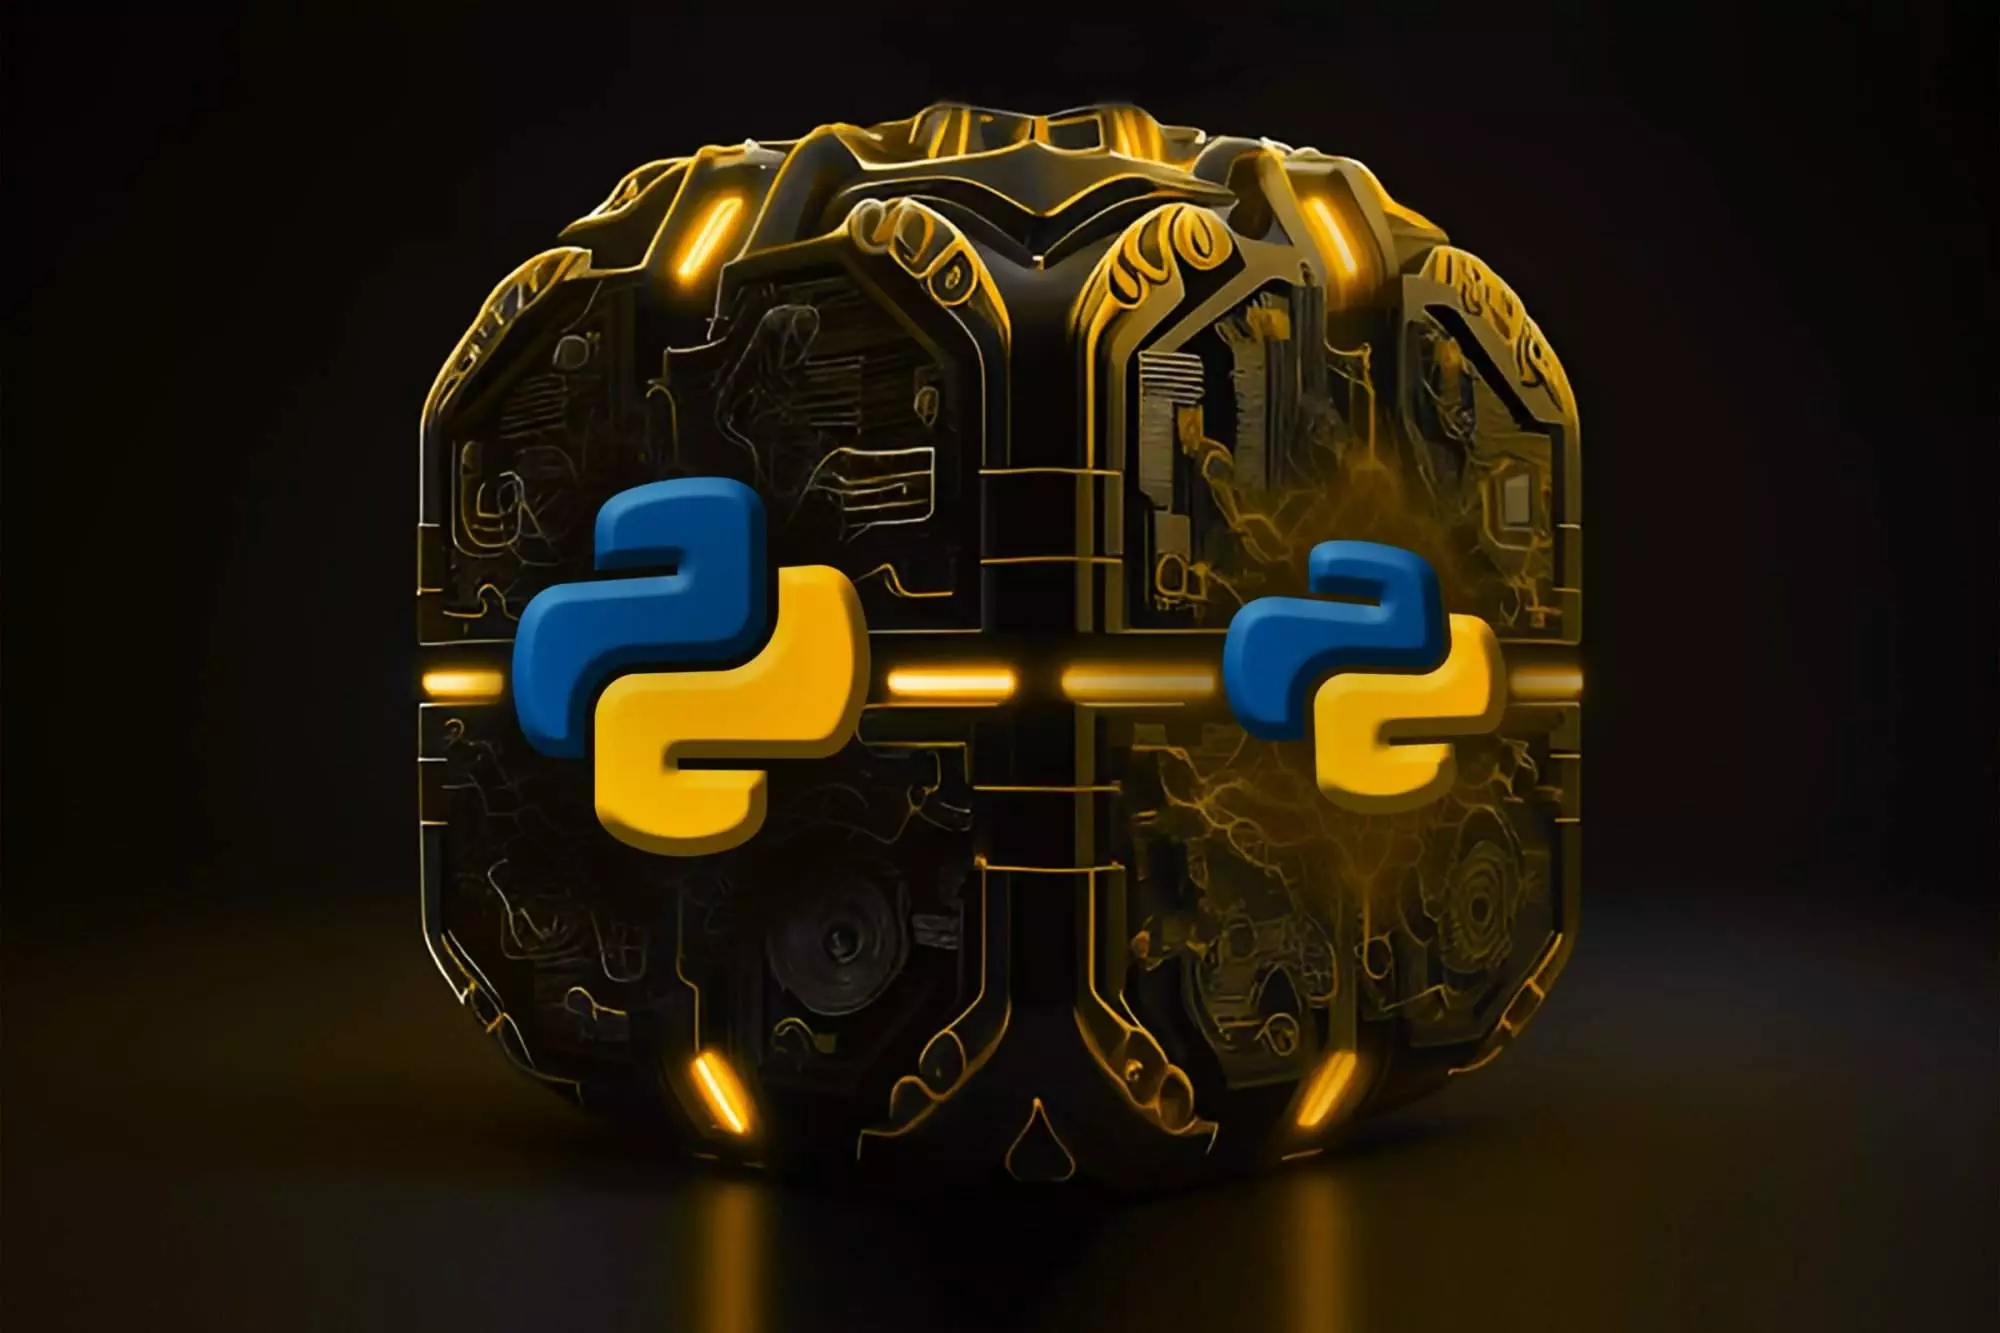 Futuristic device with the Python logo on a dark background.